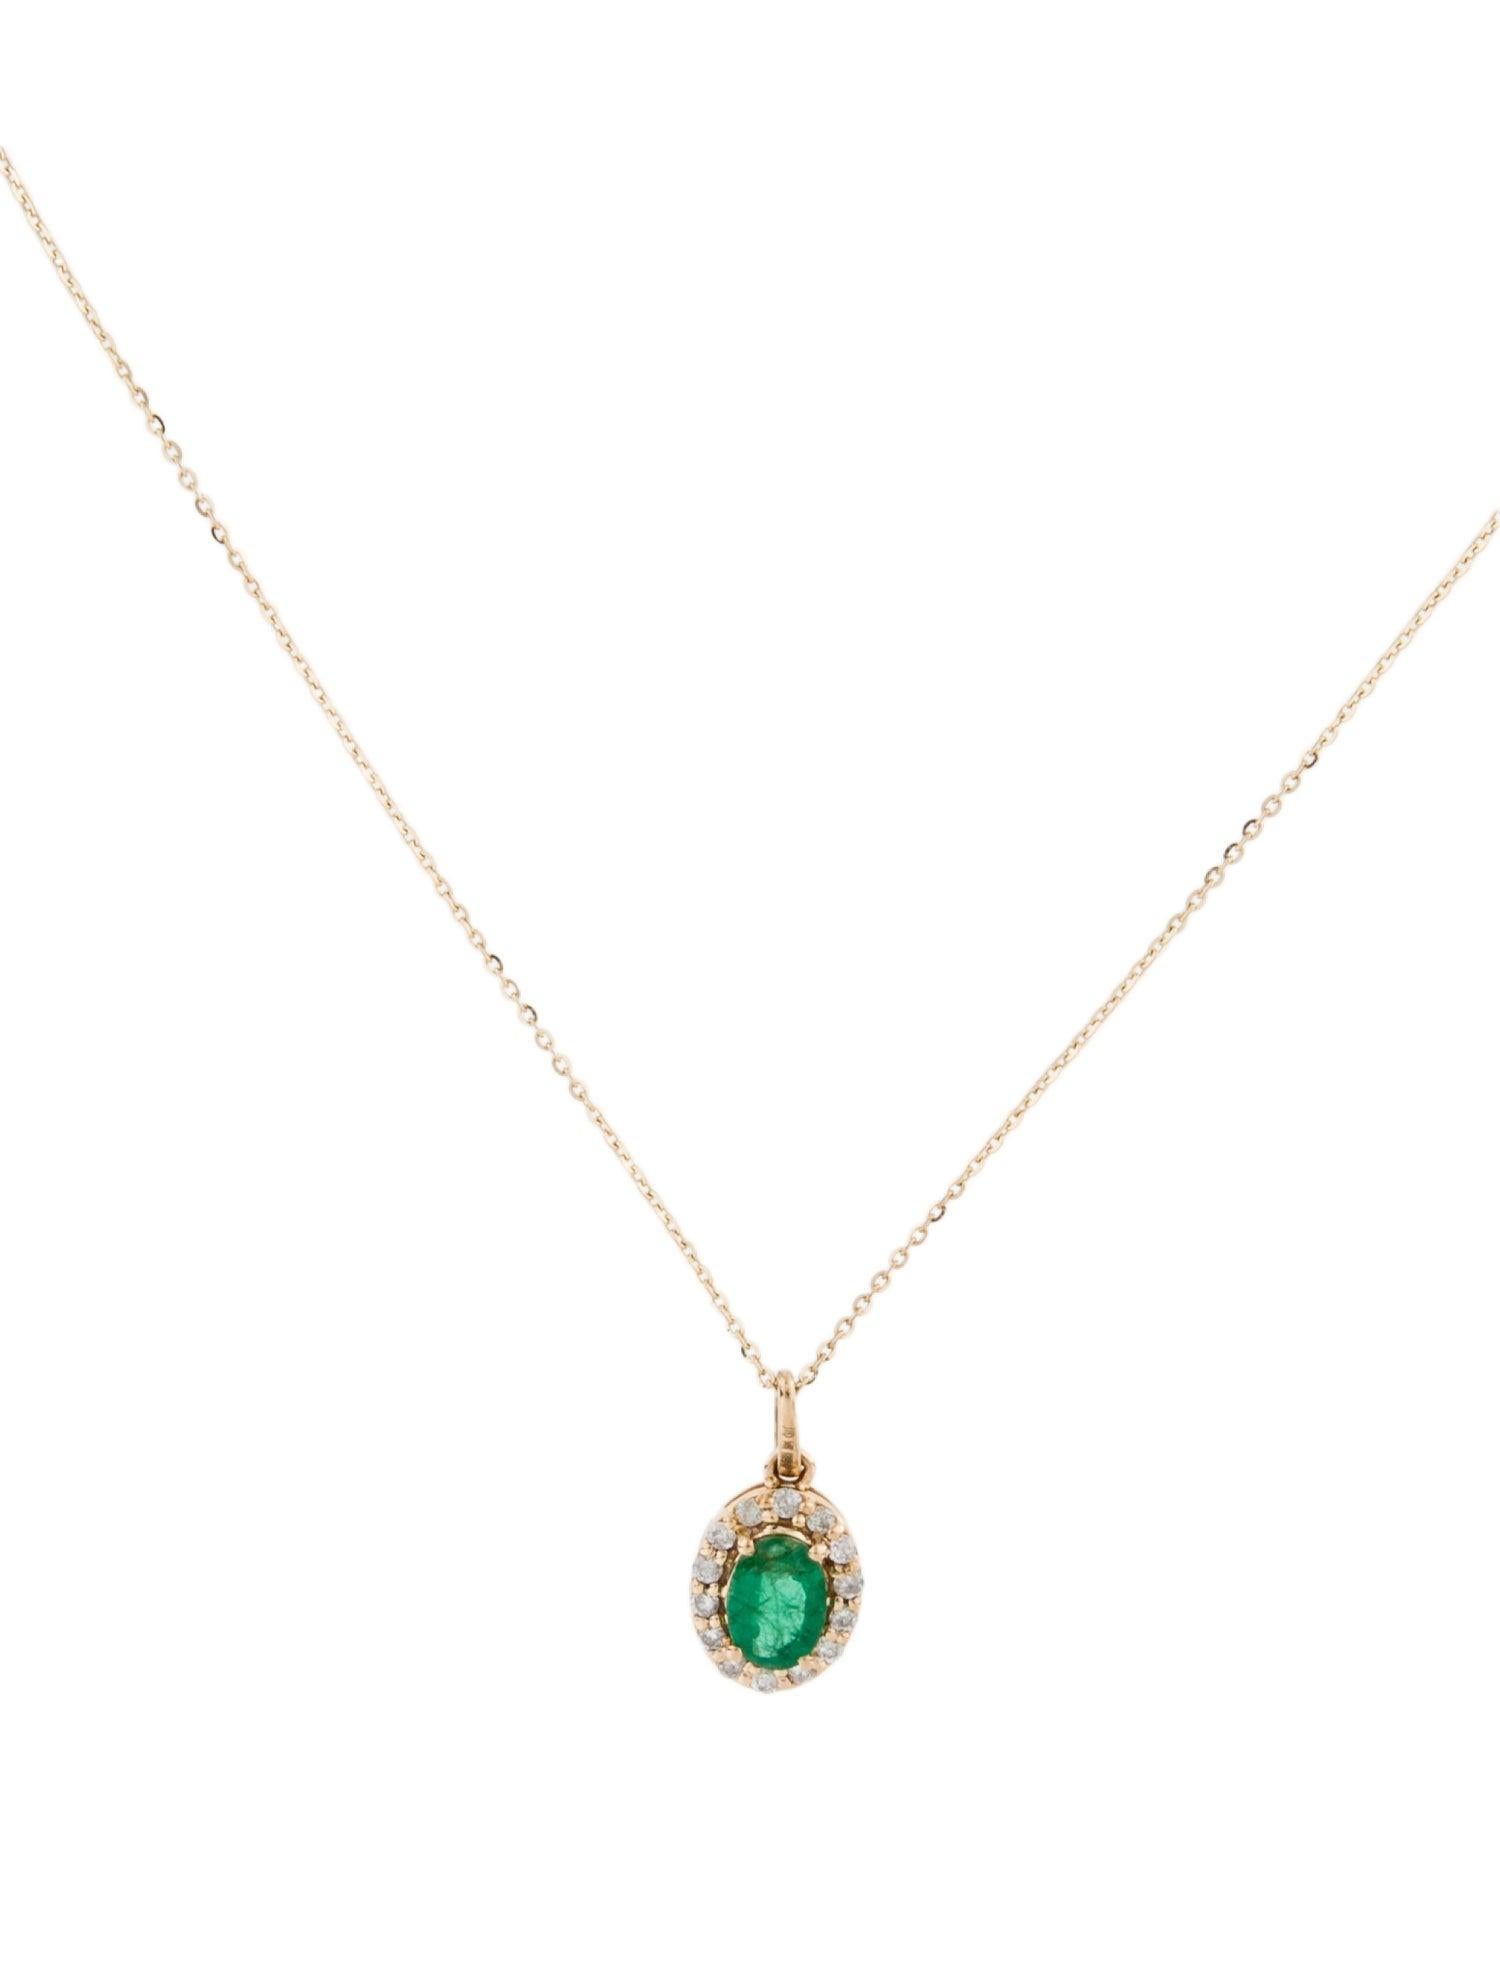 14K Emerald & Diamond Pendant Necklace: Exquisite Luxury Statement Jewelry Piece In New Condition For Sale In Holtsville, NY